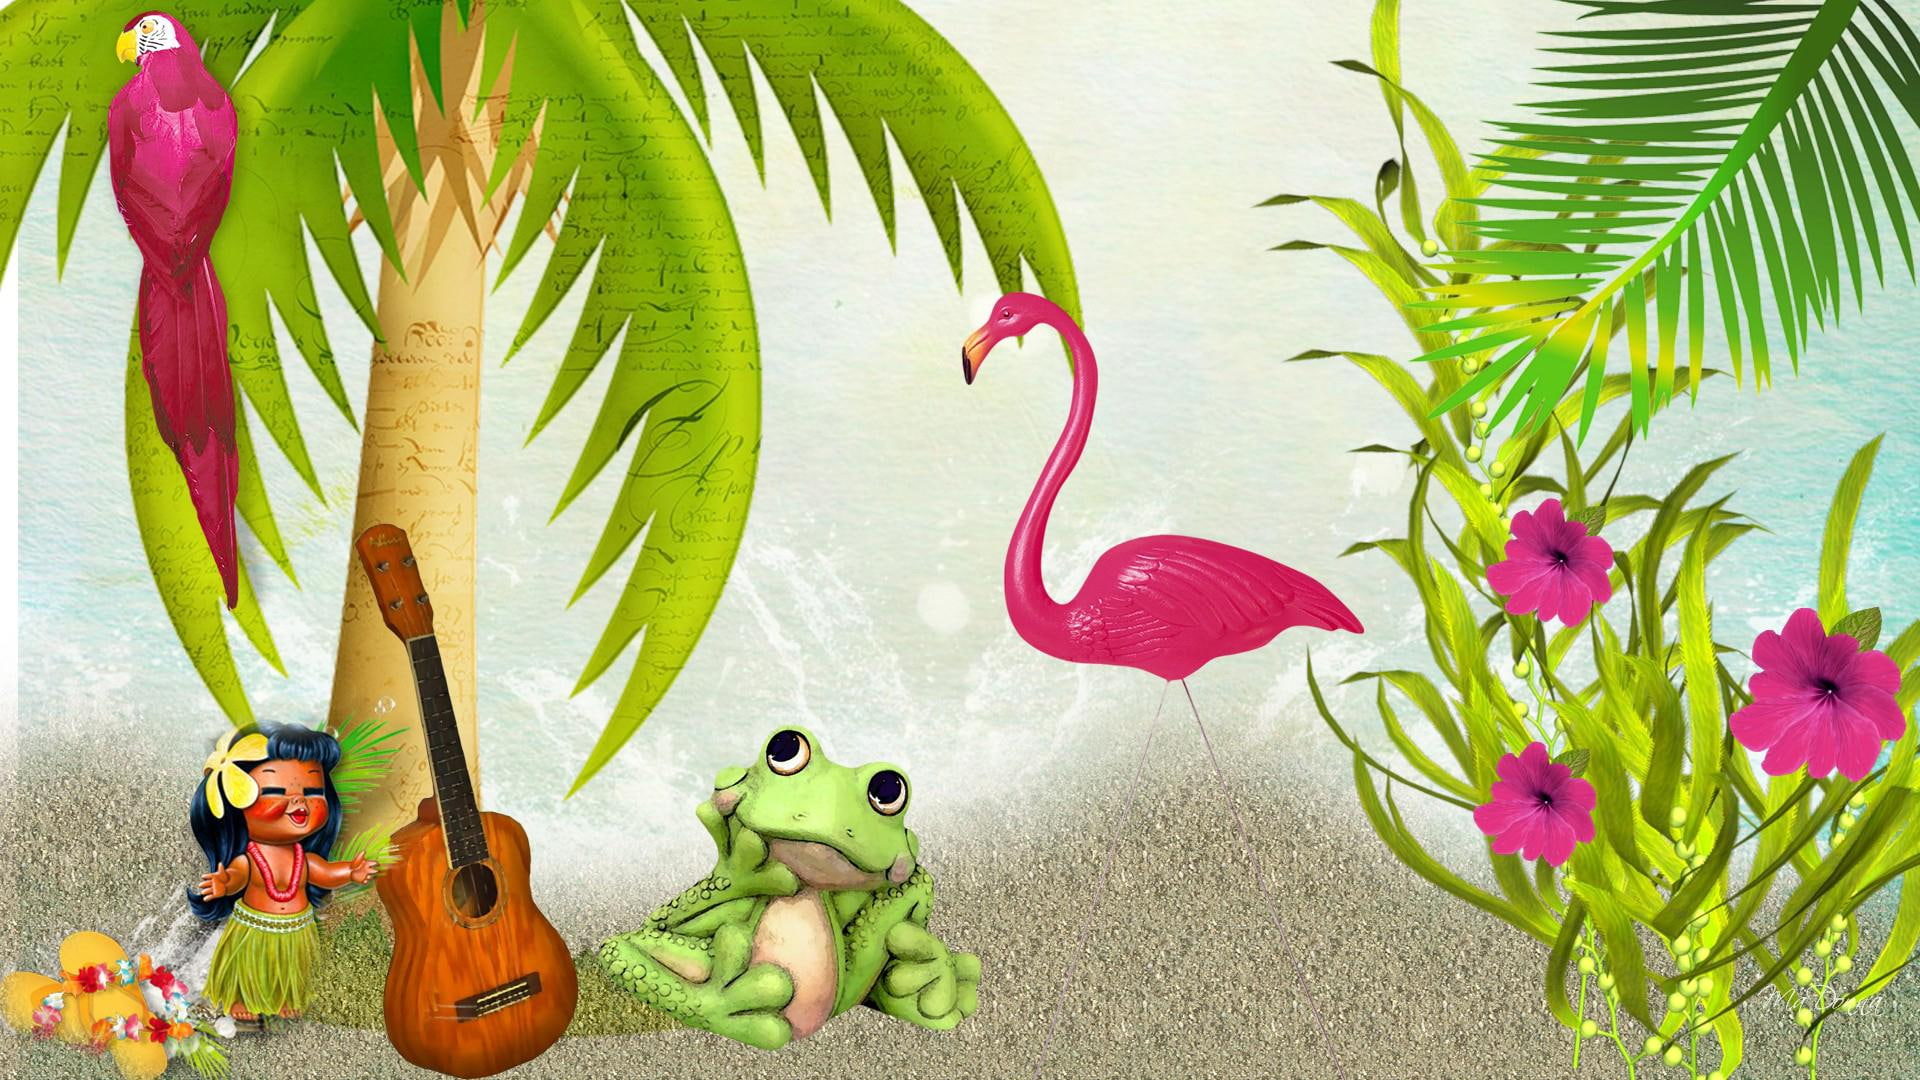 Froggy Vacation, green frog; brown acoustic guitar; coconut tree painting